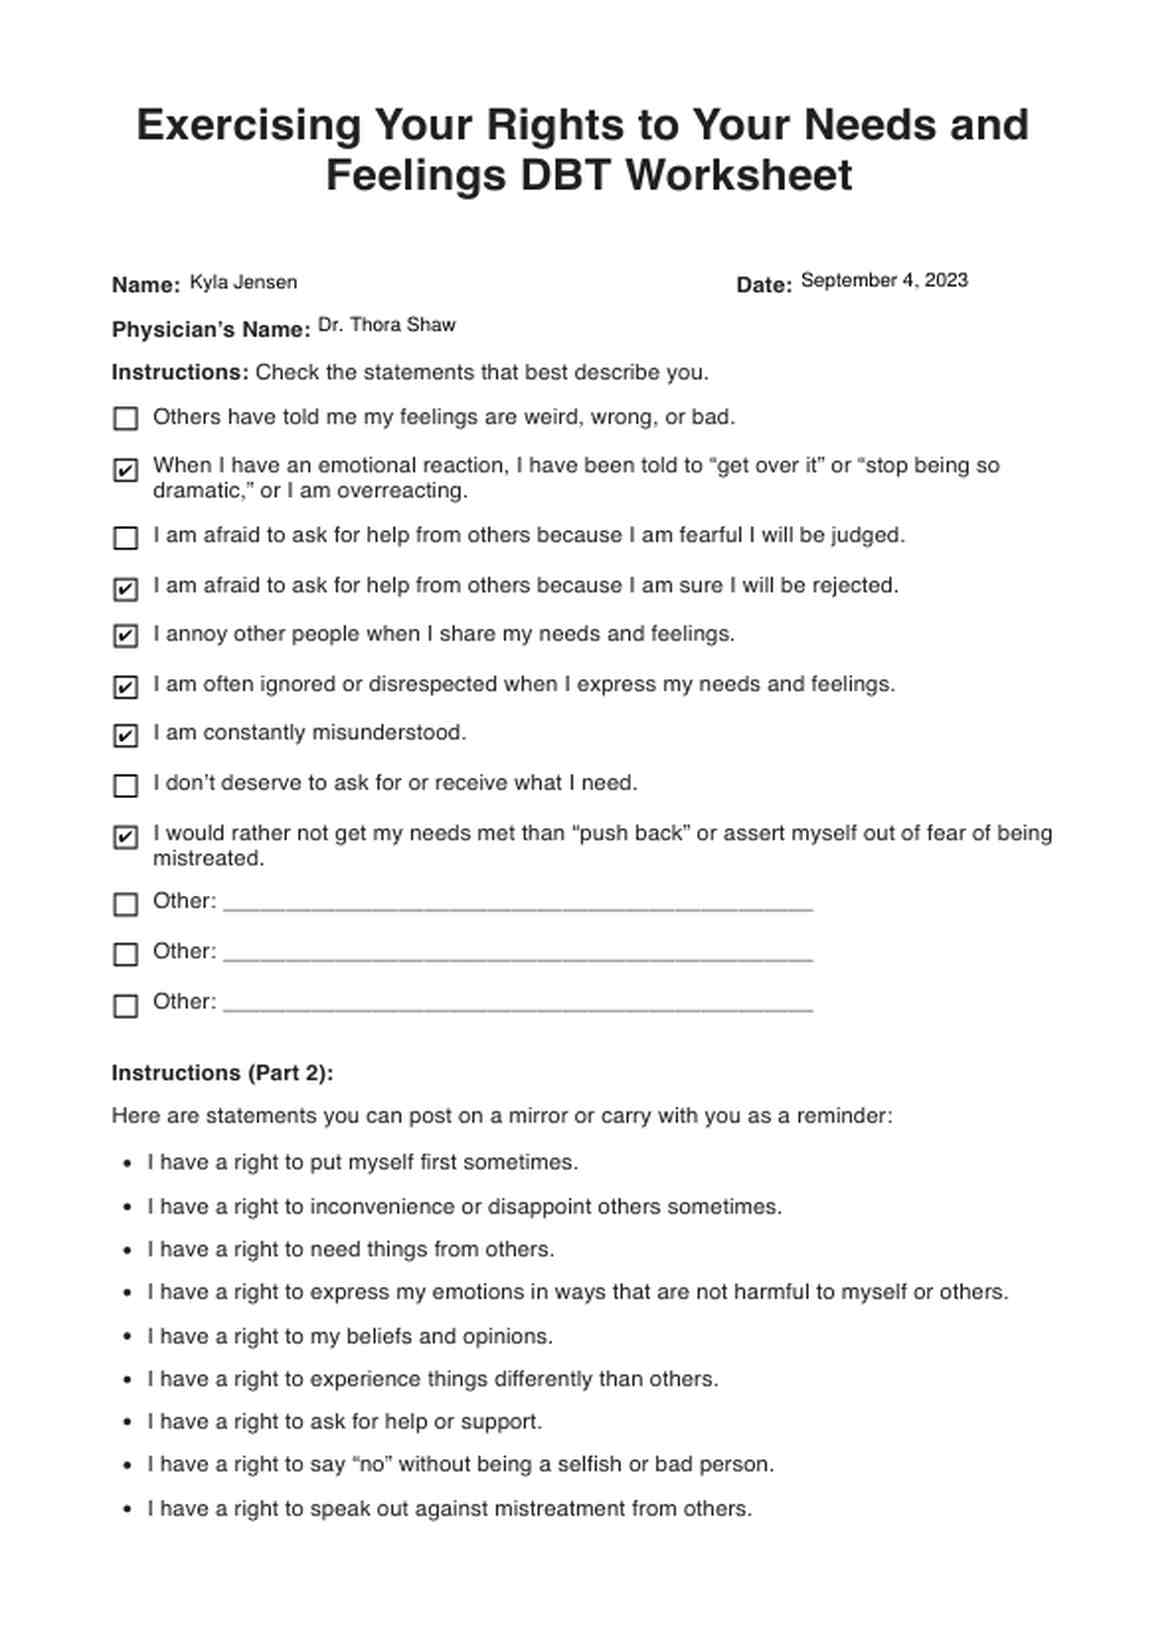 Exercising Your Rights to Your Needs and Feelings DBT Worksheet PDF Example